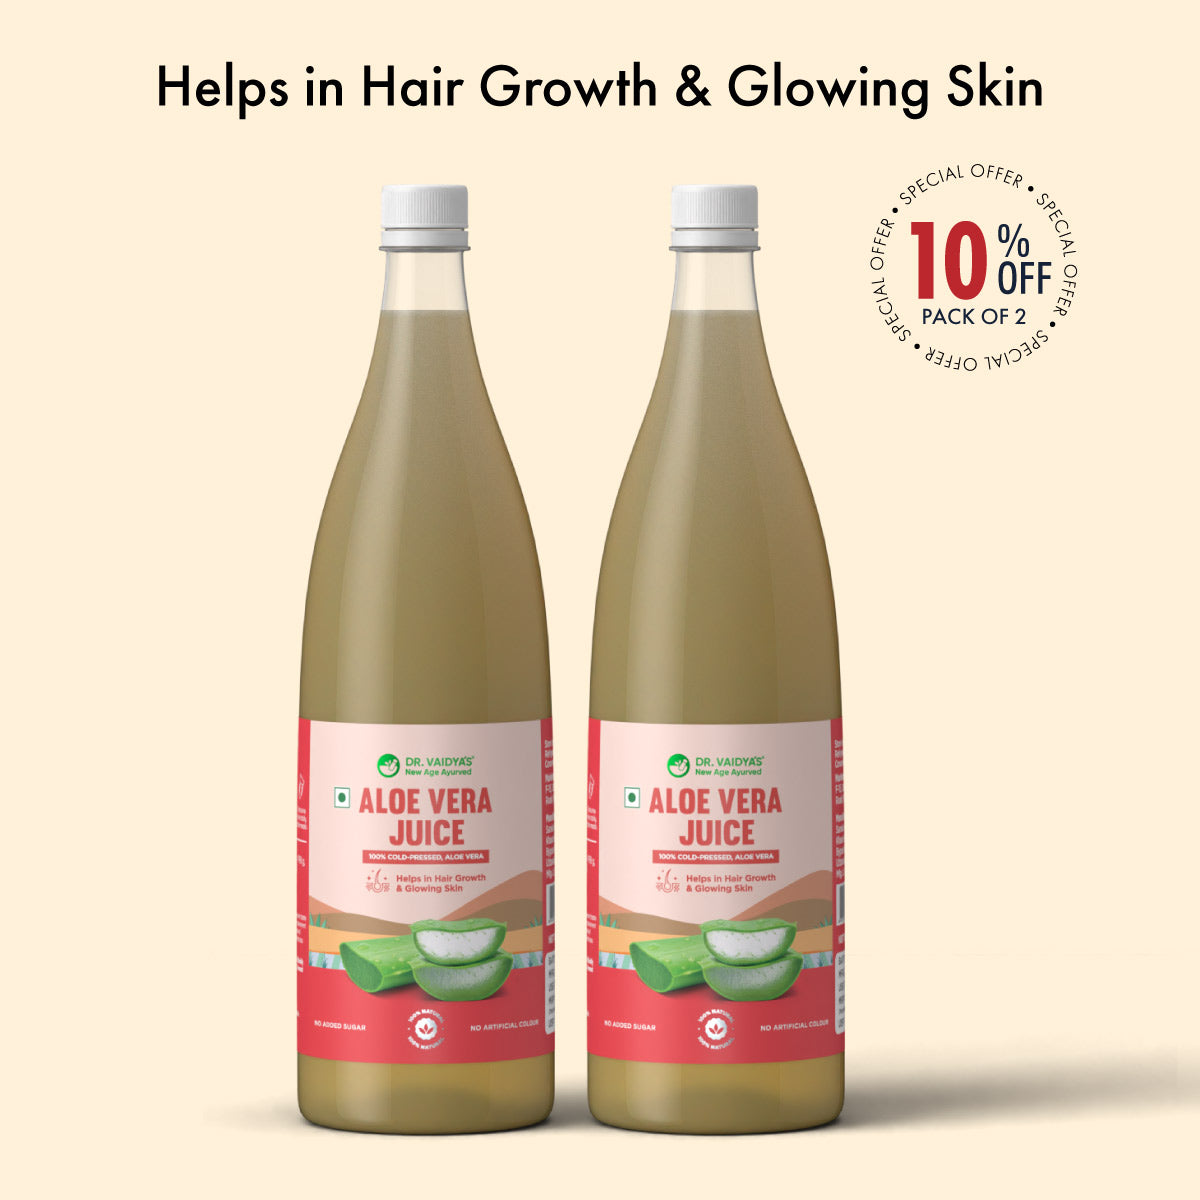 Aloe Vera Juice: For healthy hair & skin, improved immunity and digestion